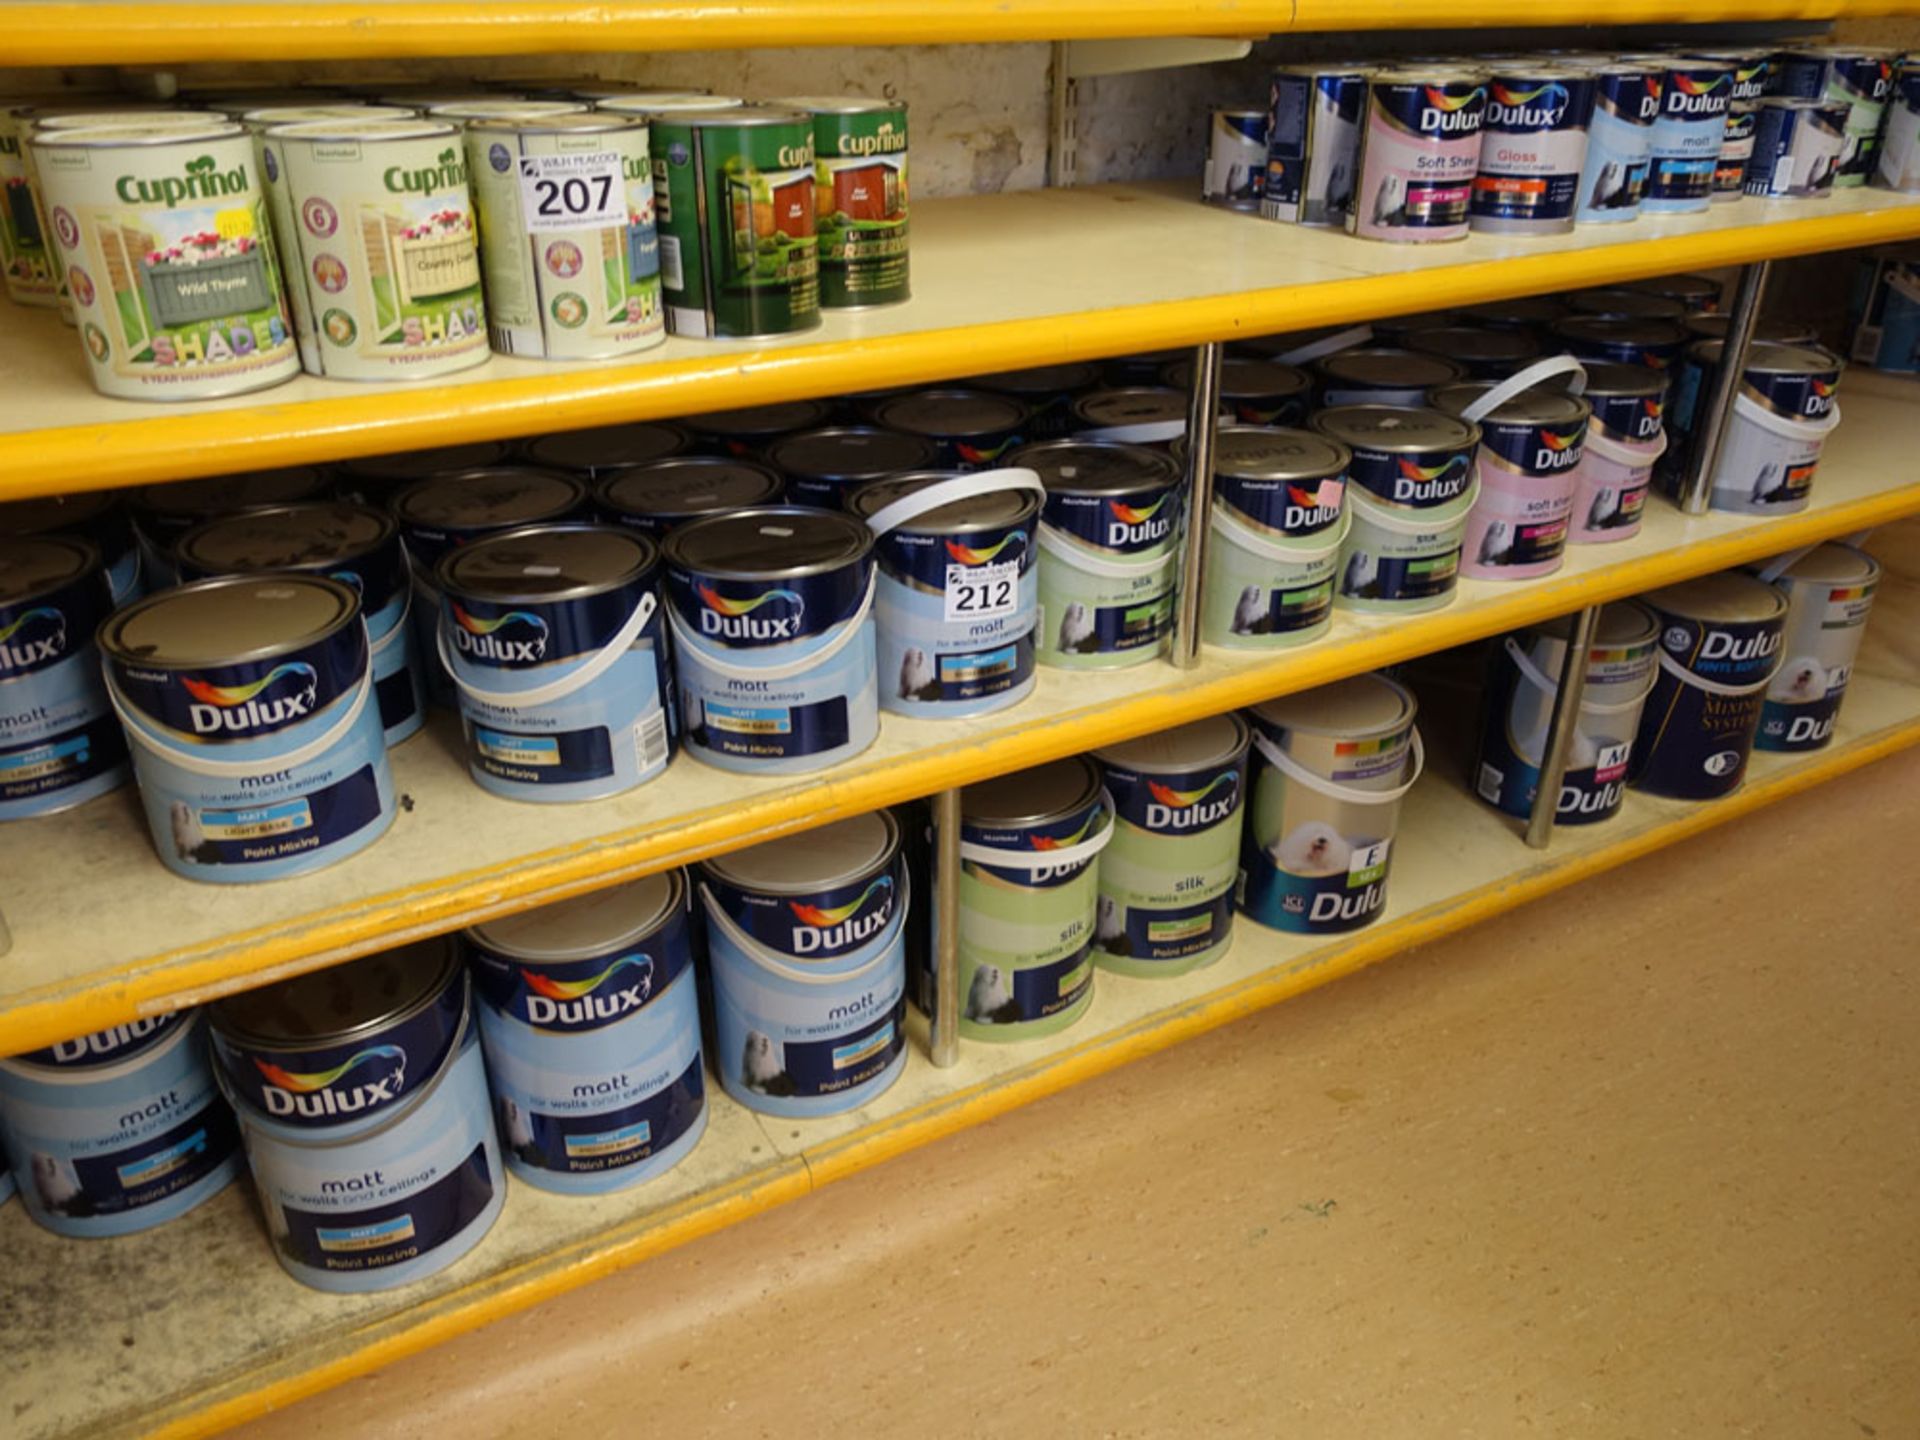 36x 2.5 litre and 27x 5 litre cans of Dulux base paint (for mixing)